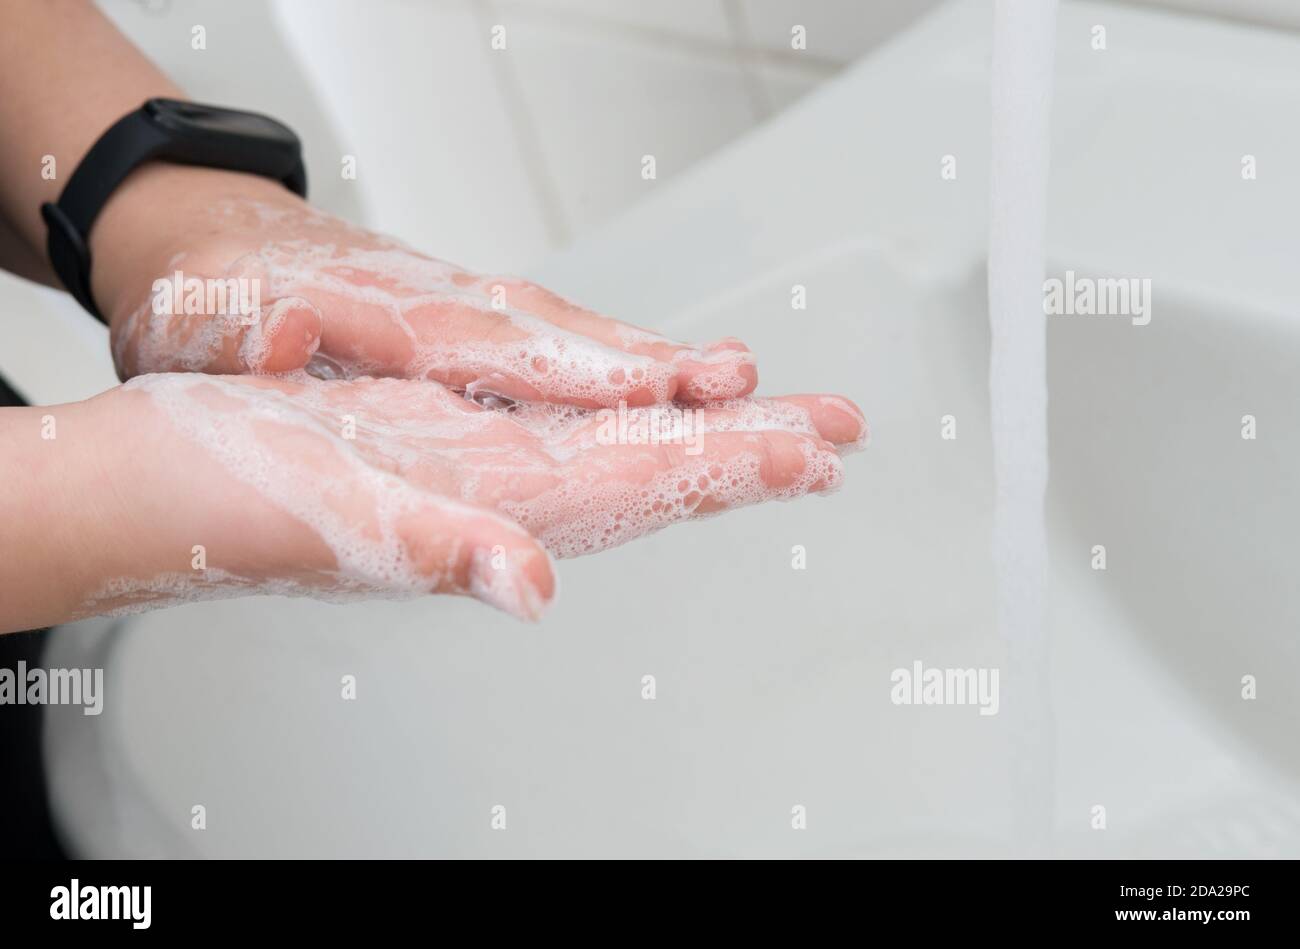 Soapy hands over sink in the bathroom.Hygiene & Cleaning Hands. Stock Photo